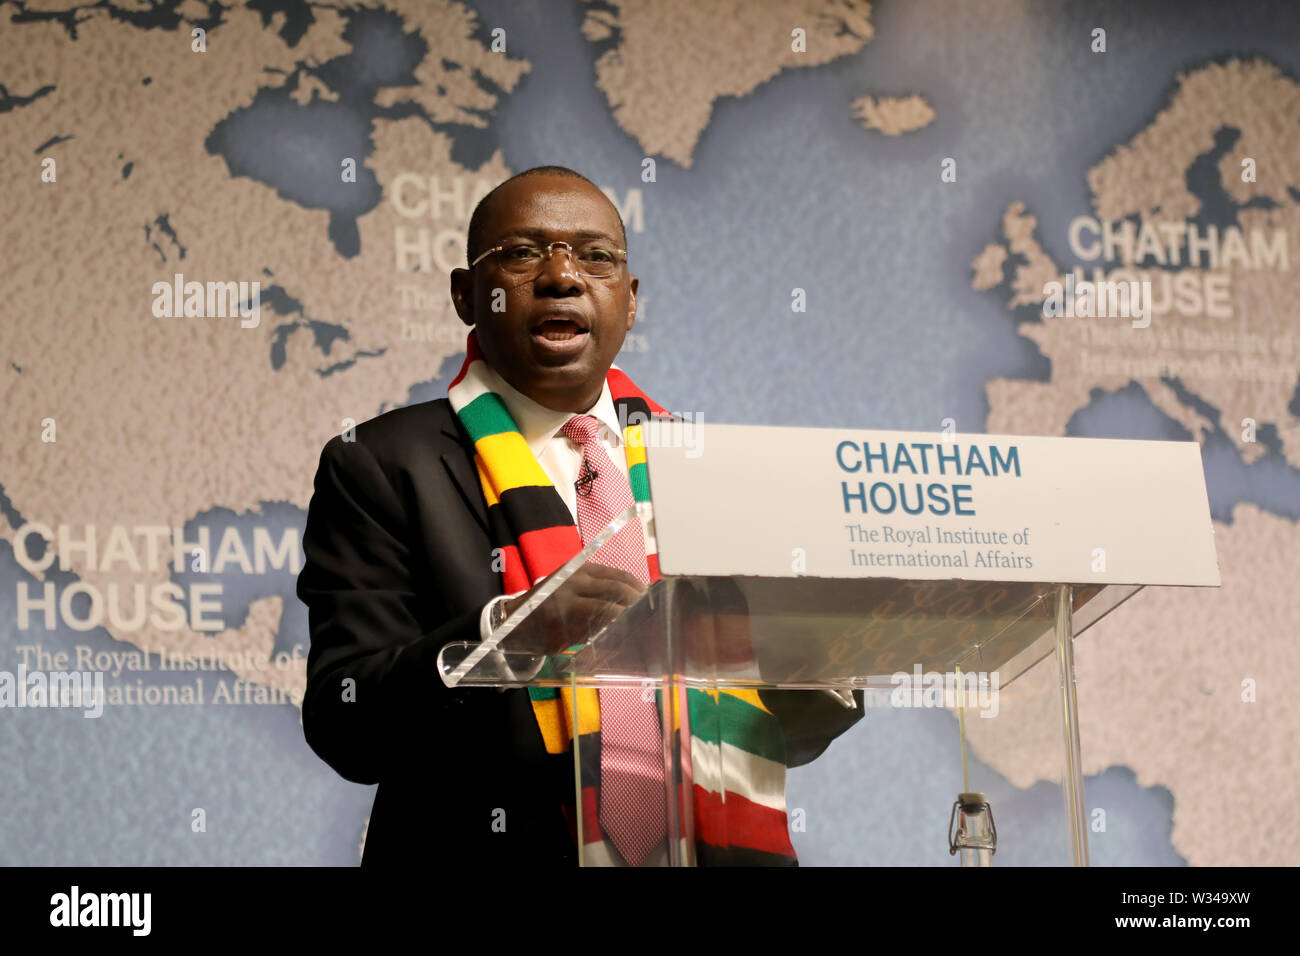 London / UK – July 12, 2019: Sibusiso Busi Moyo, Zimbabwe’s foreign minister, gives a talk on his country’s foreign policy at Chatham House Stock Photo